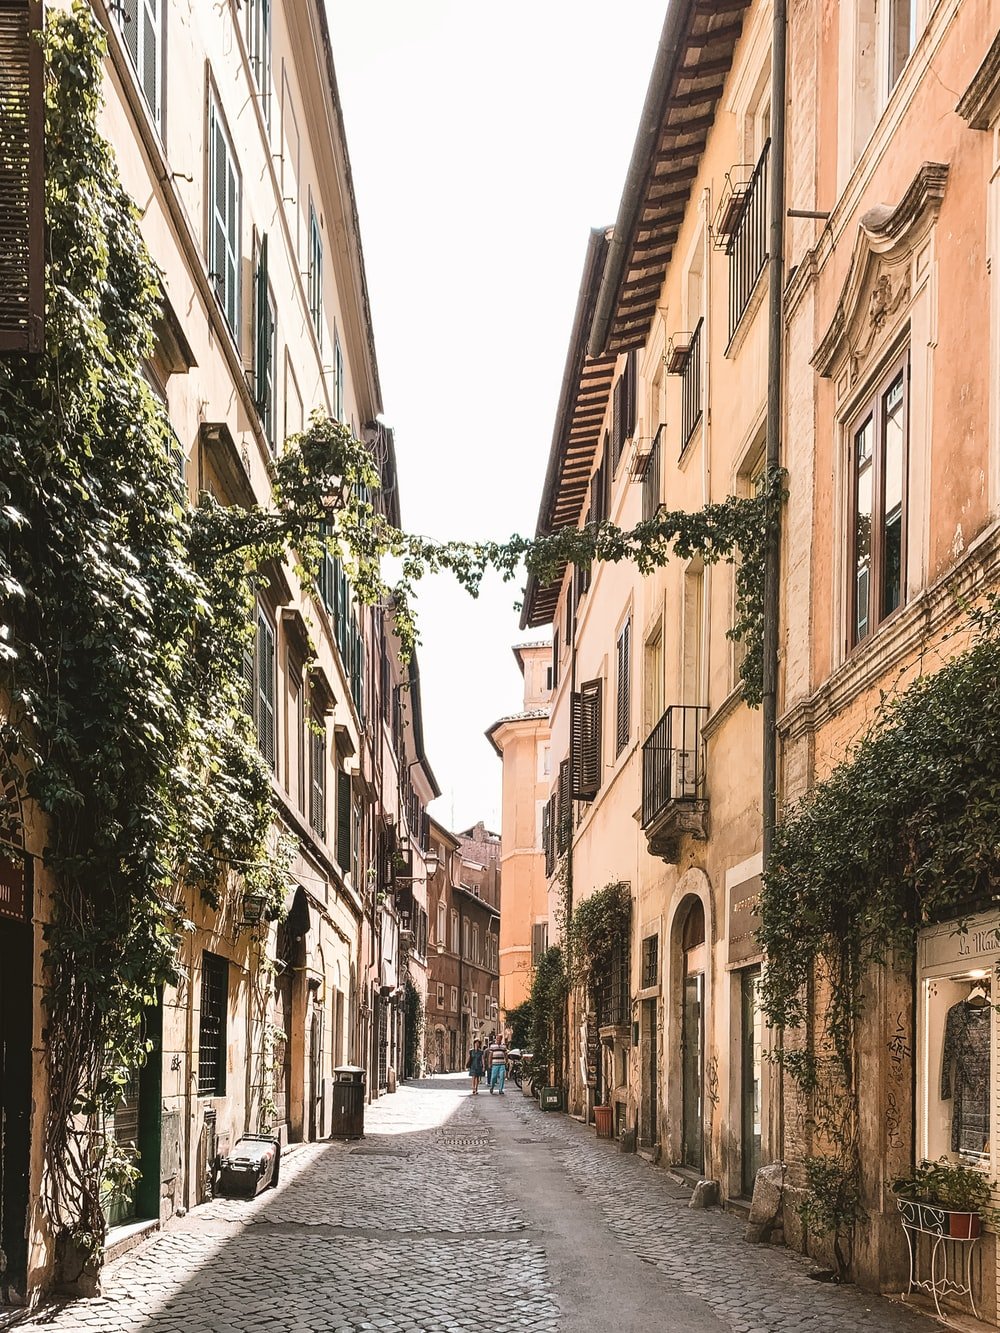 Italy Street Picture. Download Free Image